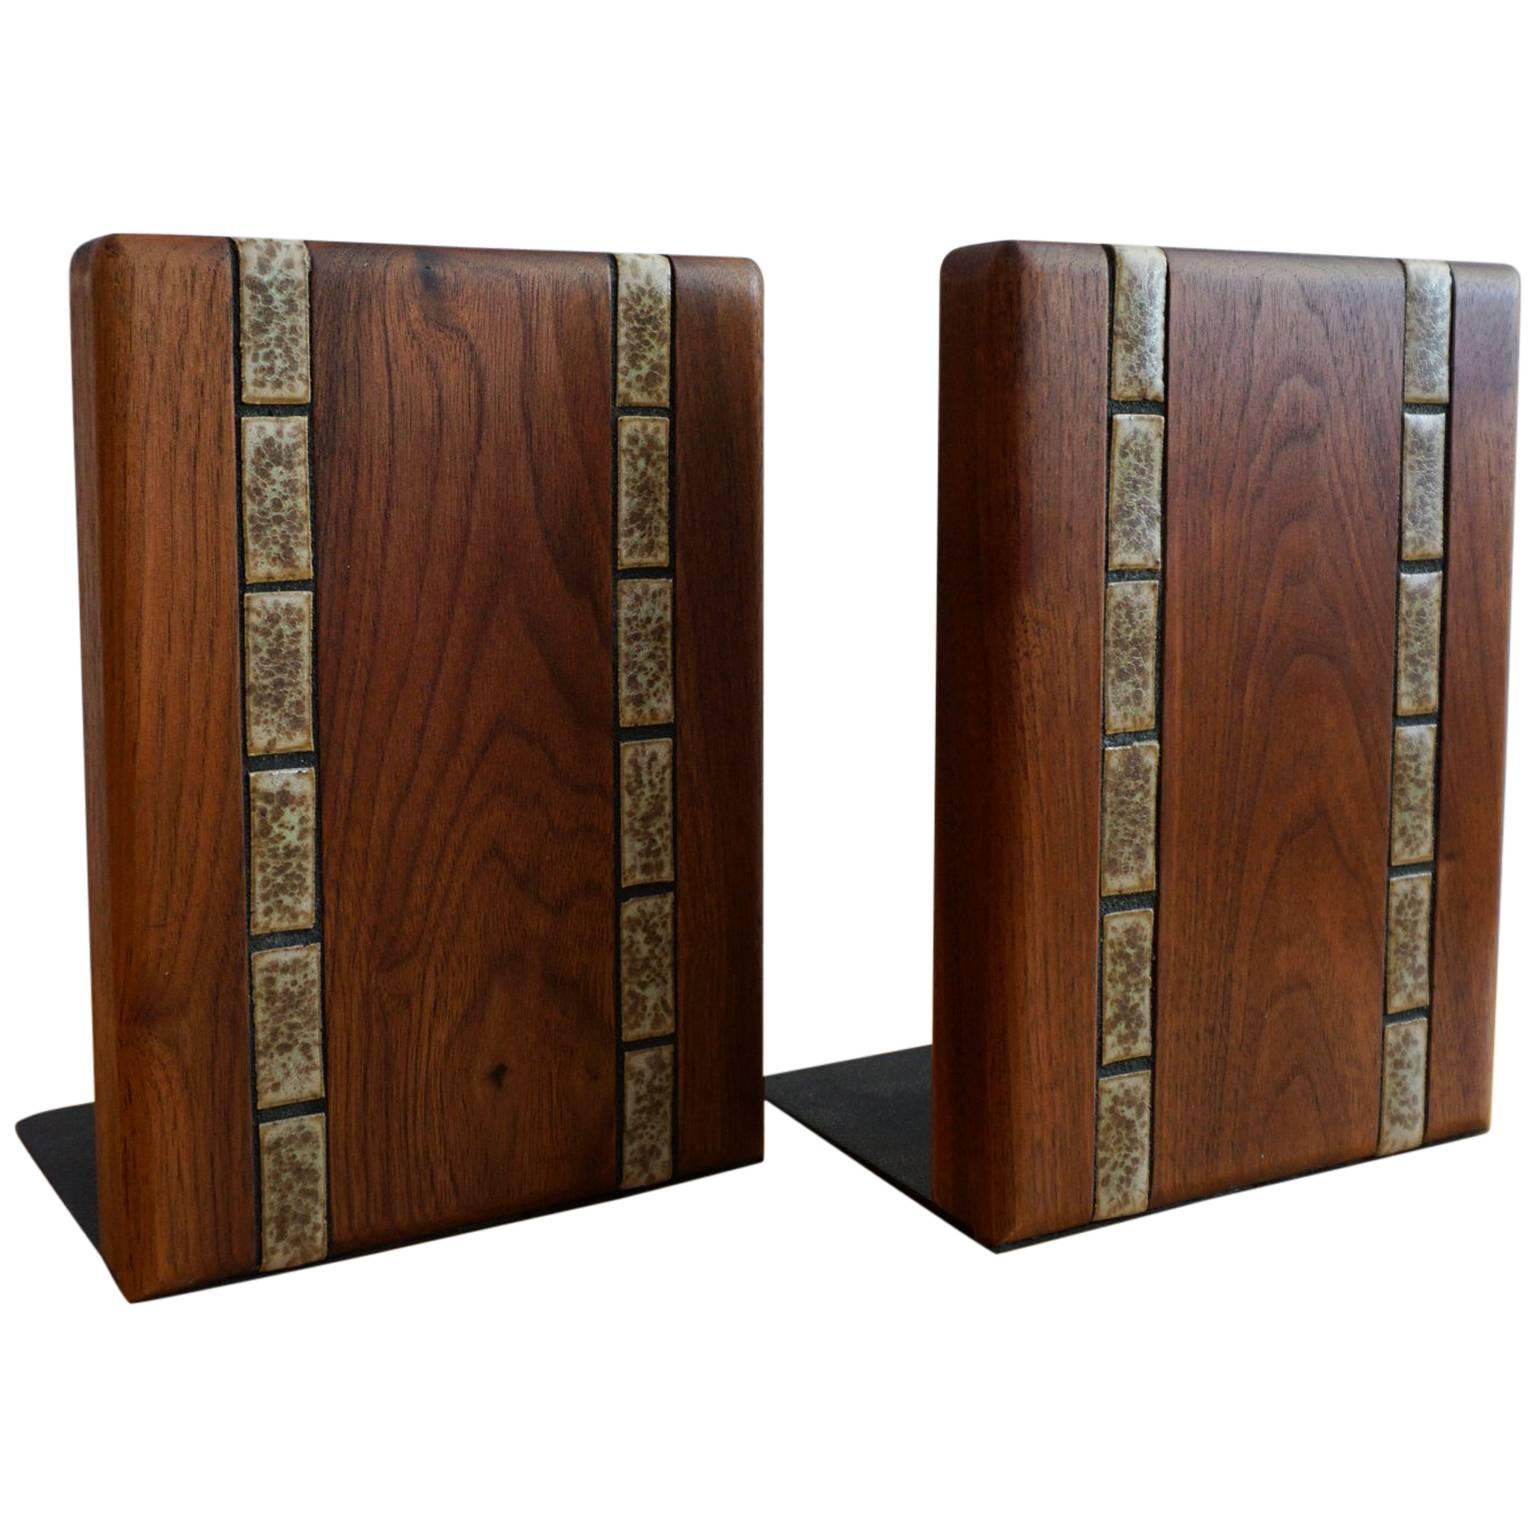 Martz Ceramic and Wood Bookends